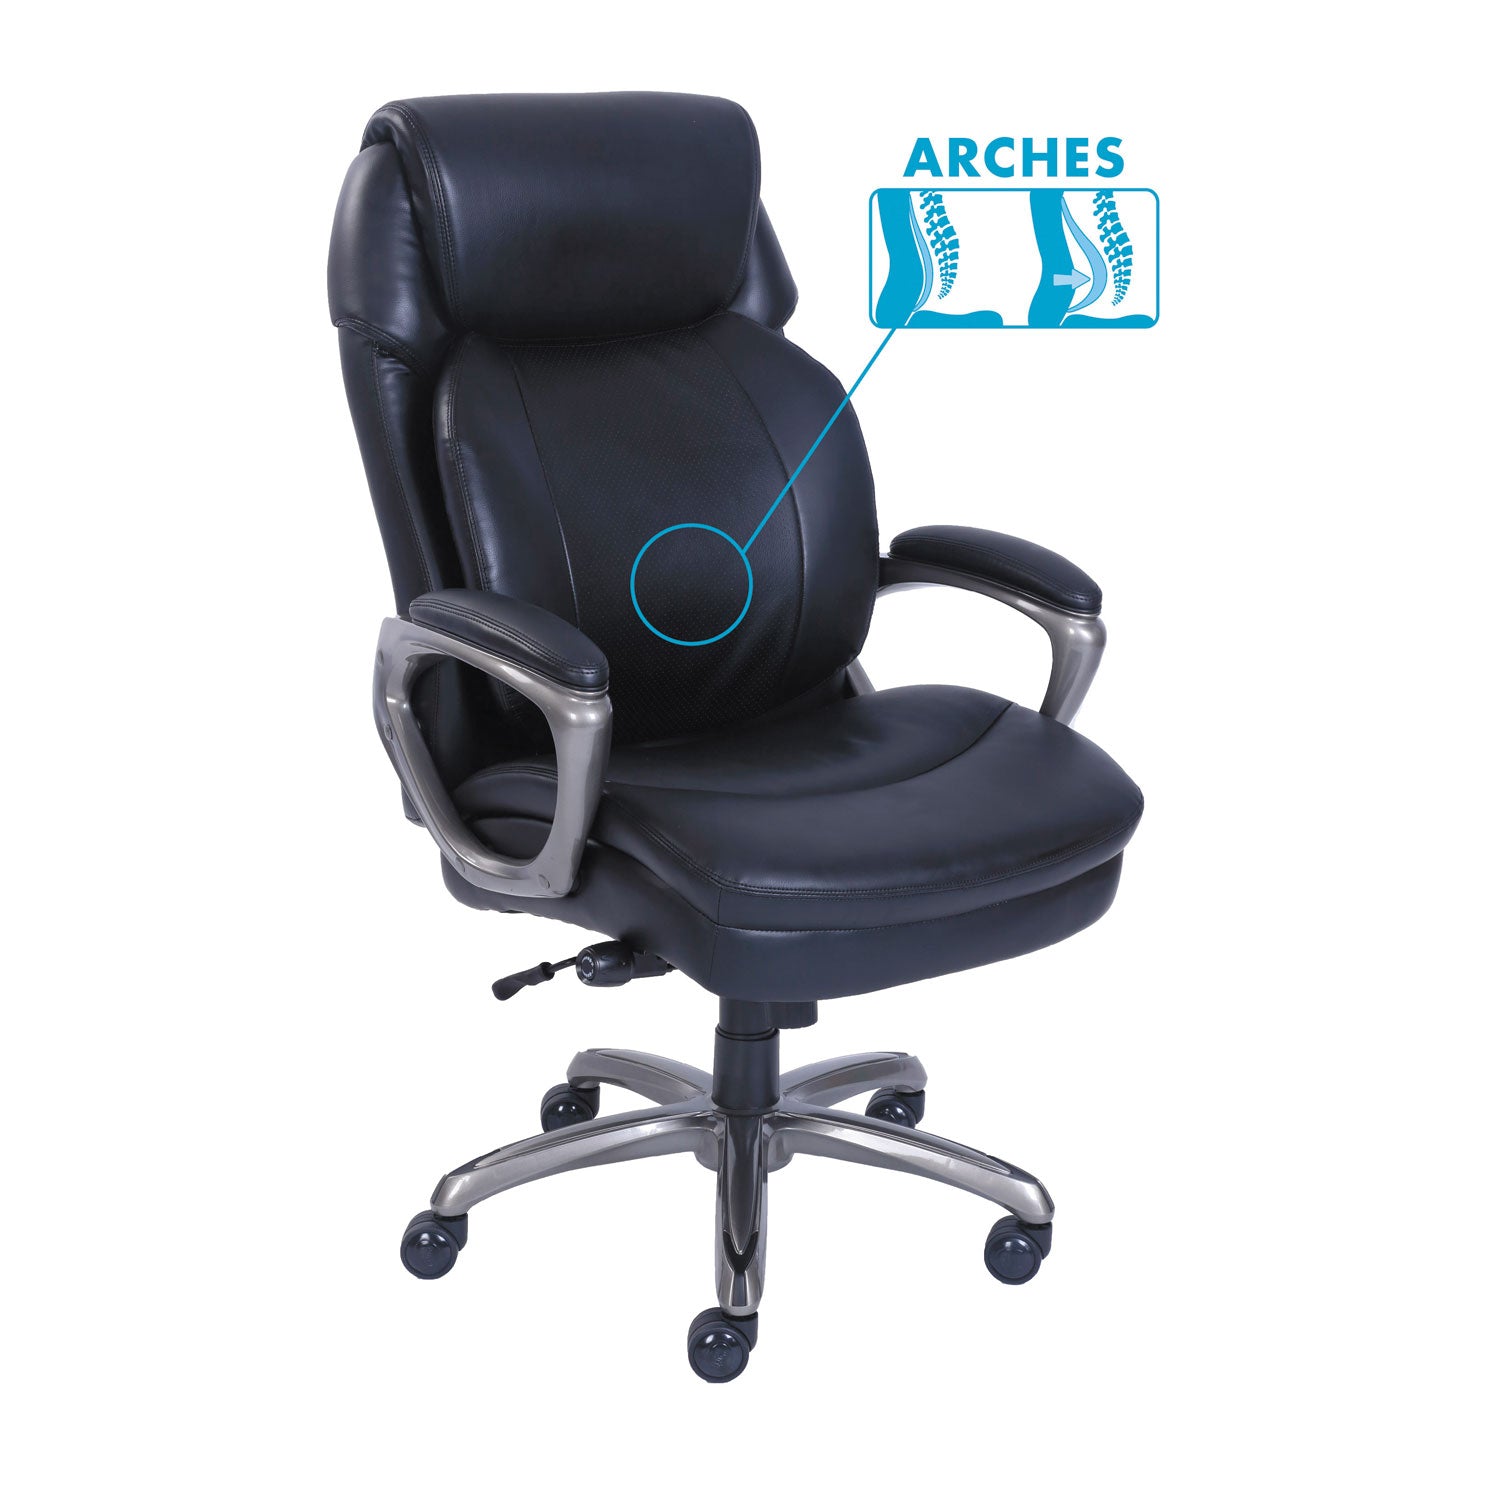 cosset-high-back-executive-chair-supports-up-to-275-lb-1875-to-2175-seat-height-black-seat-back-slate-base_srj48965 - 1